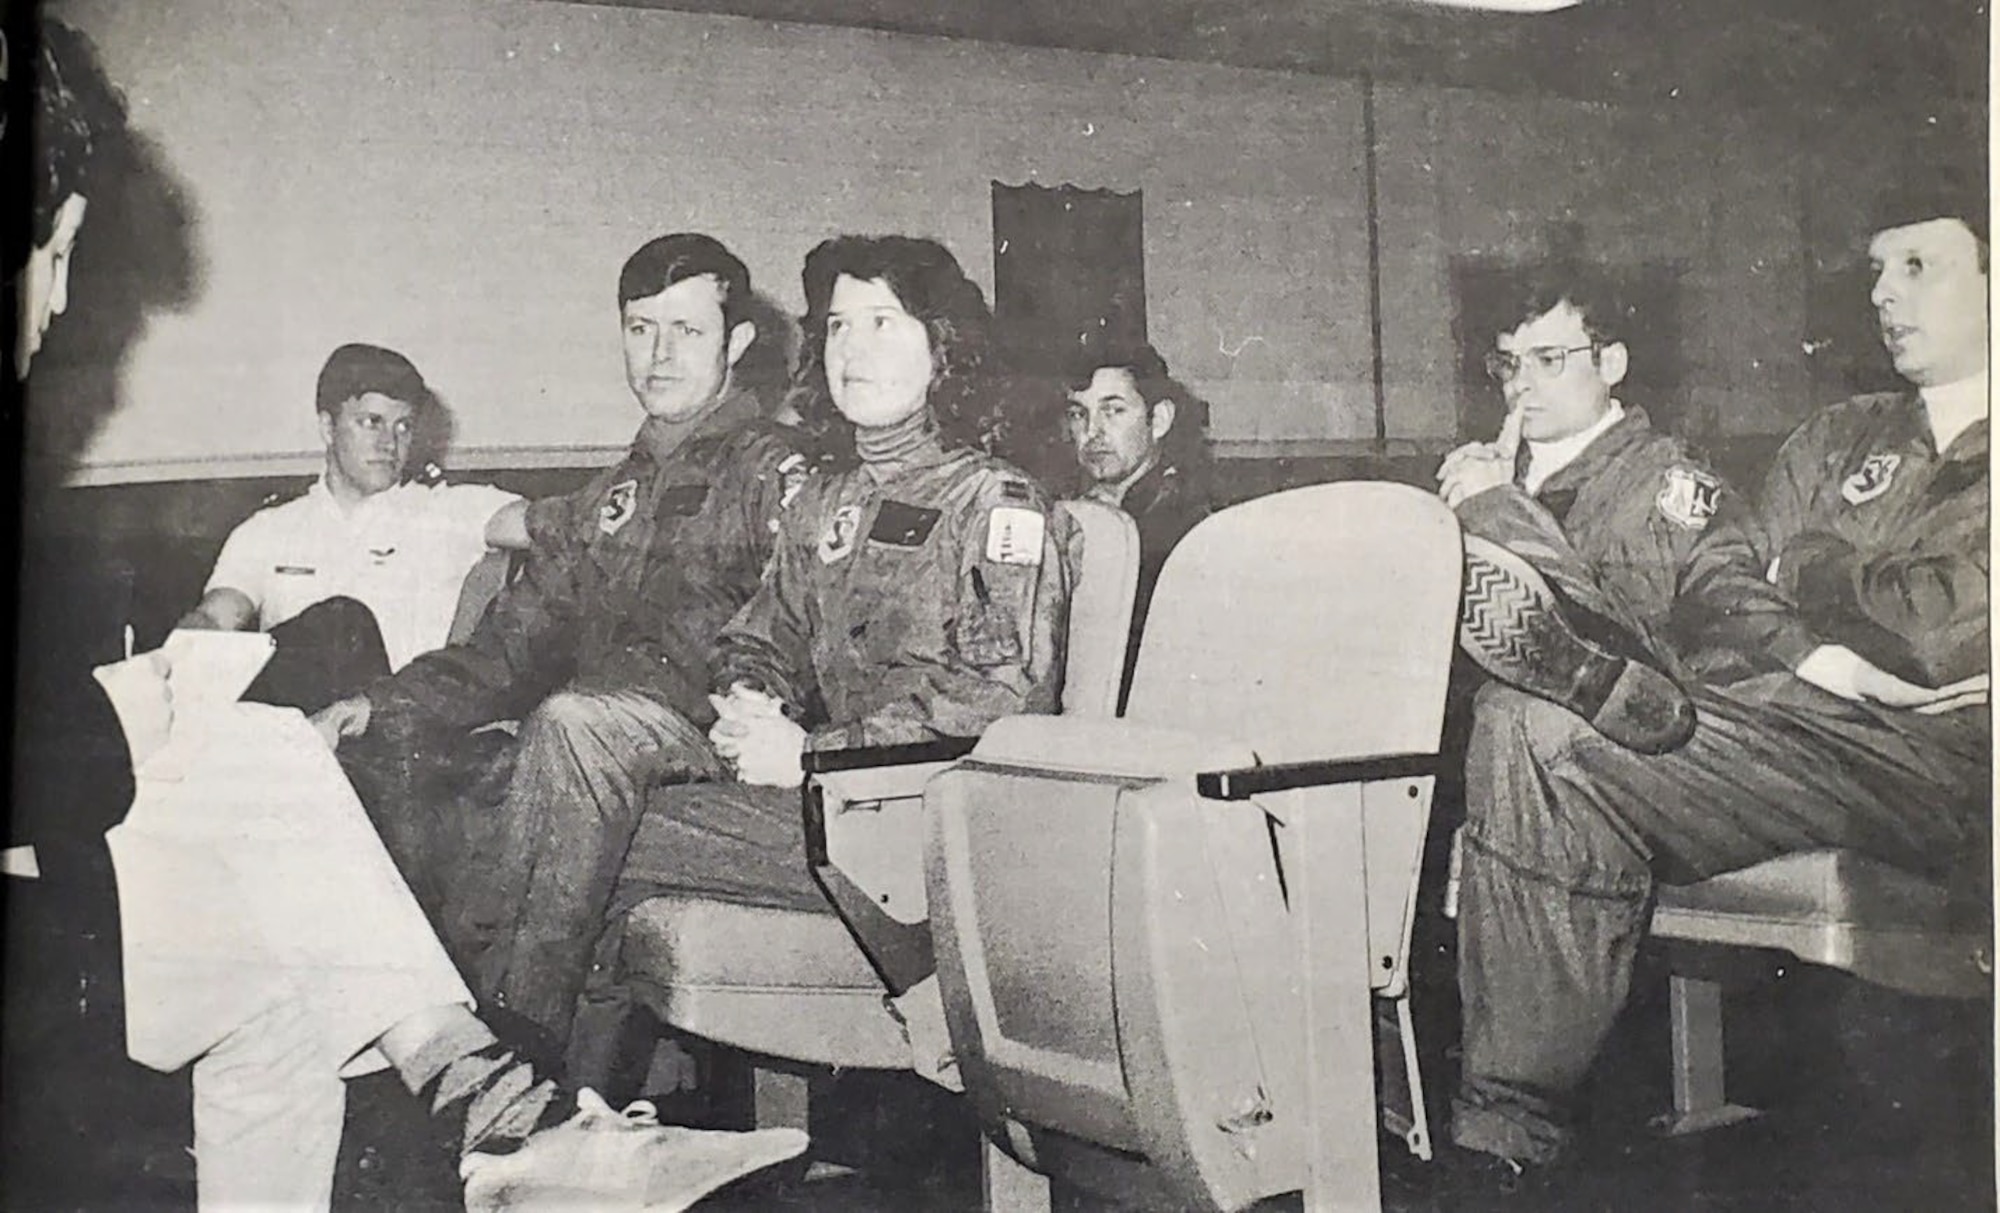 Tony Grossman, left, a reporter from Foster’s Daily Democrat, interviews crew members of the heart transport mission; Capt. Robert Keneally, 509th Bombardment Wing emergency operations controller; Lt. Col. Brent E. Chapman, 509th Air Refueling Squadron KC-135 pilot; Capt. Leone G. Atsalis, 509 AREFS KC-135 co-pilot; Lt. Col. Peter L. Greenawalt, 393rd Bombardment Squadron pilot of the FB-111A backup flight; Capt. Steven Gruger, the 393rd BMS FB-111 navigator who held the heart in his lap; and Capt. David Lefforge, 393rd BMS pilot of the FB-111 which performed the transport mission. (U.S. Air Force photo by Sgt Stefanie Doner)